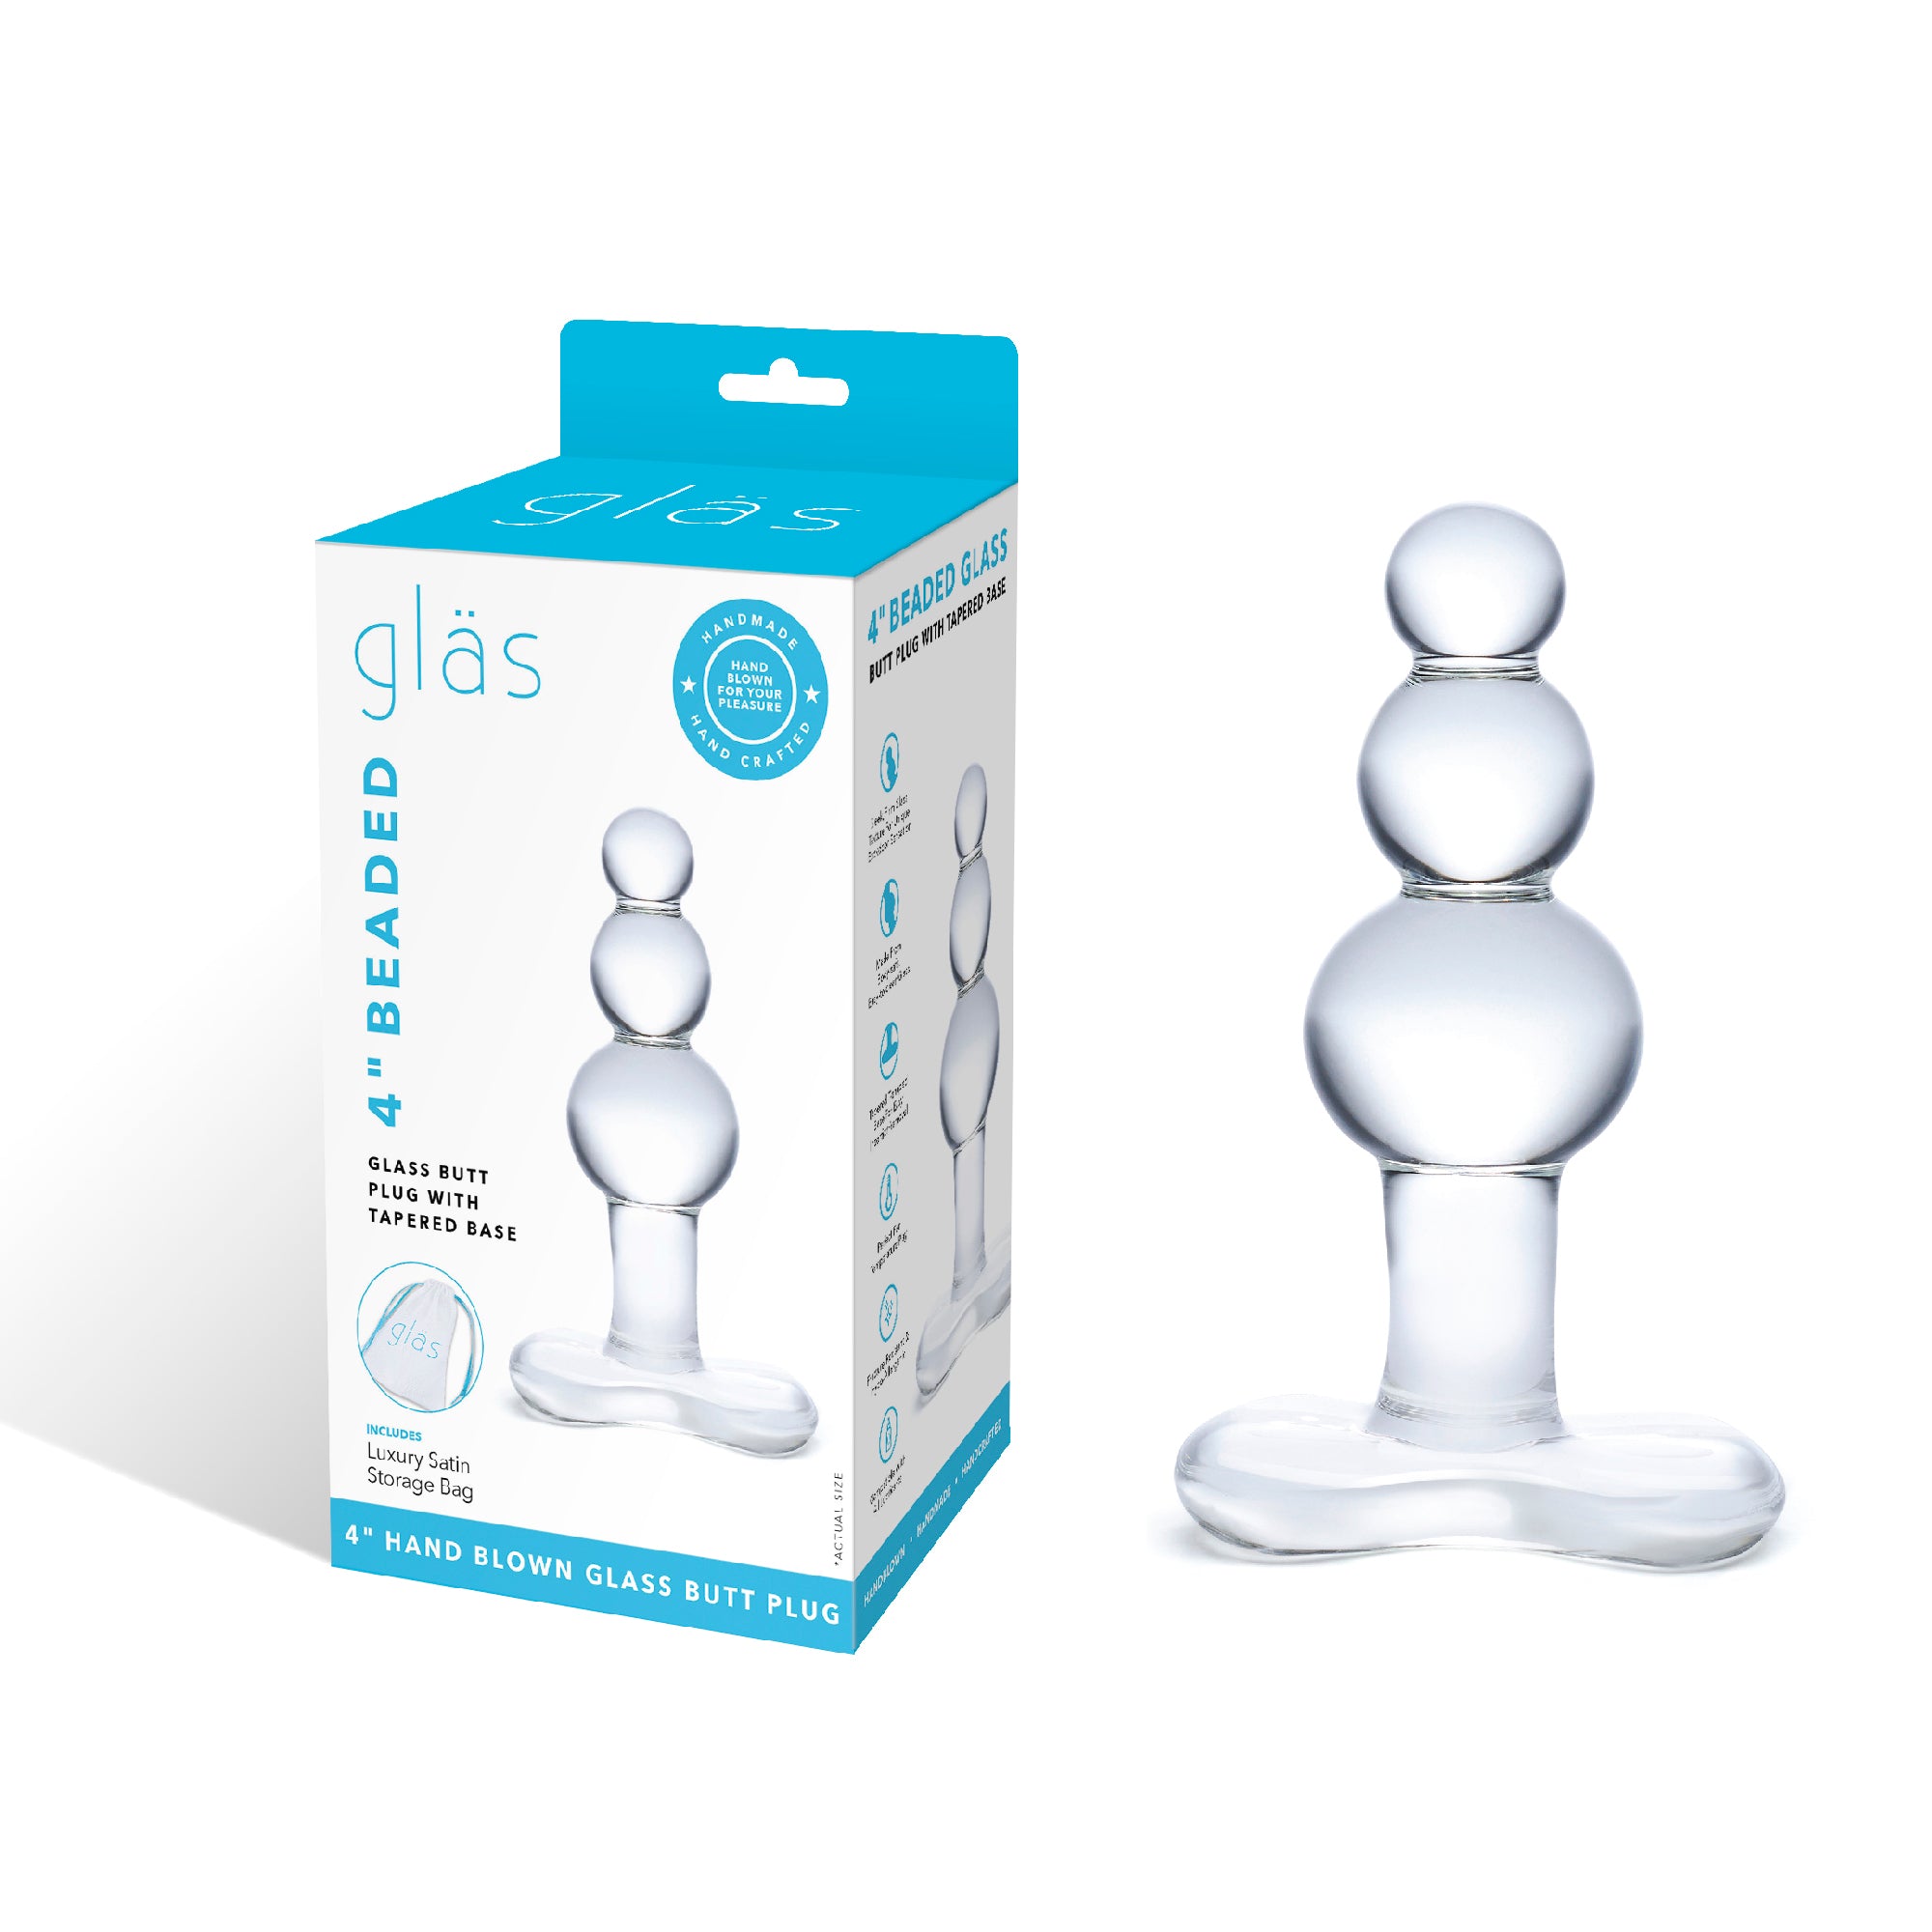 Packaging of the Gläs 4 inch Beaded Glass Putt with Tapered Base